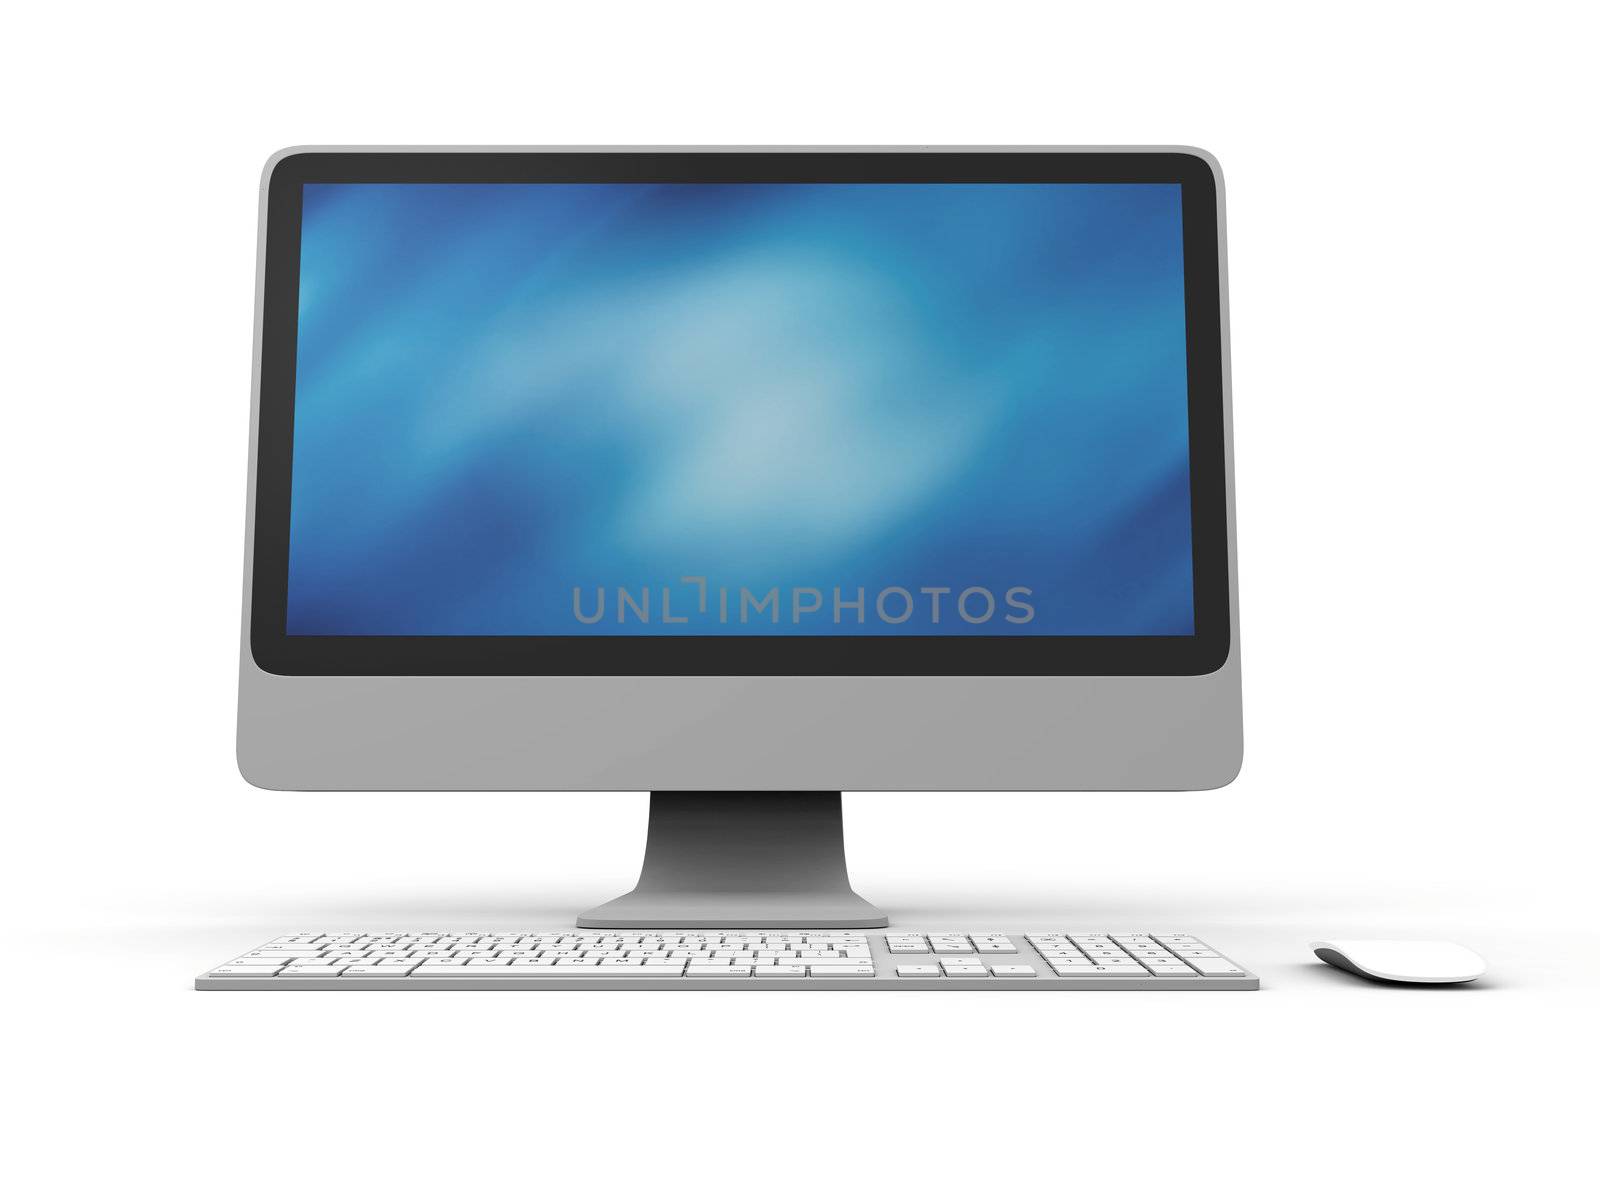 Front view of modern desktop computer with wireless keyboard and mouse